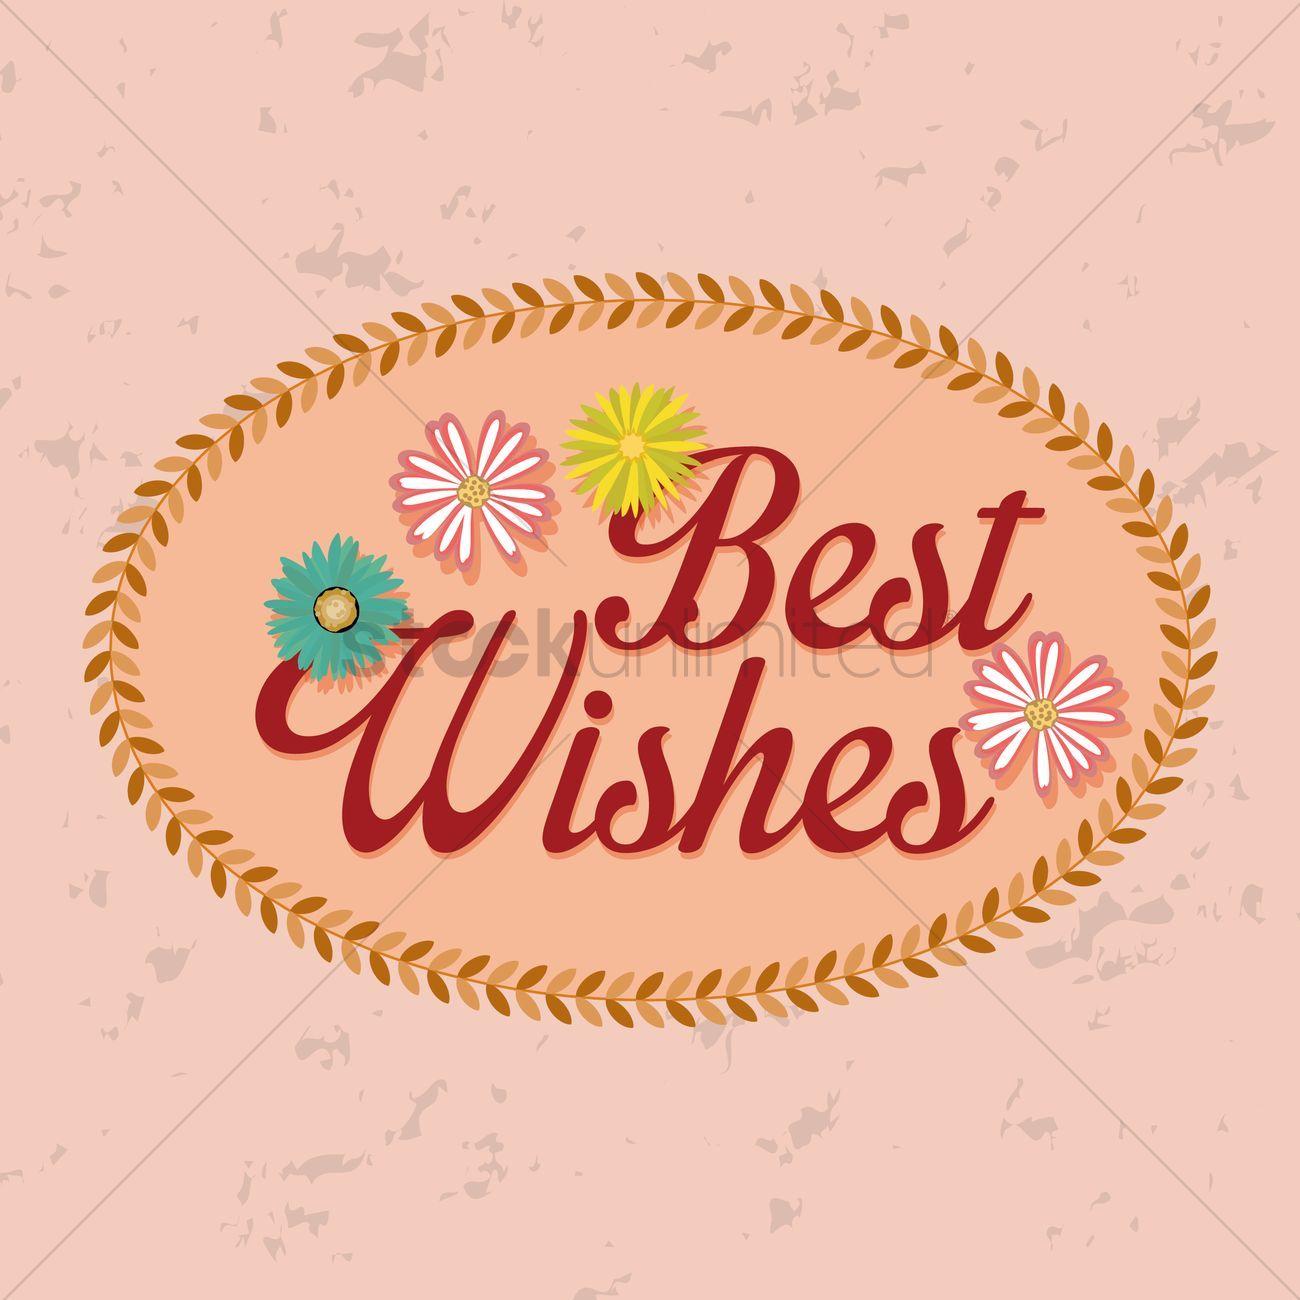 Best Wishes Logo - Best wishes label Vector Image - 1827395 | StockUnlimited